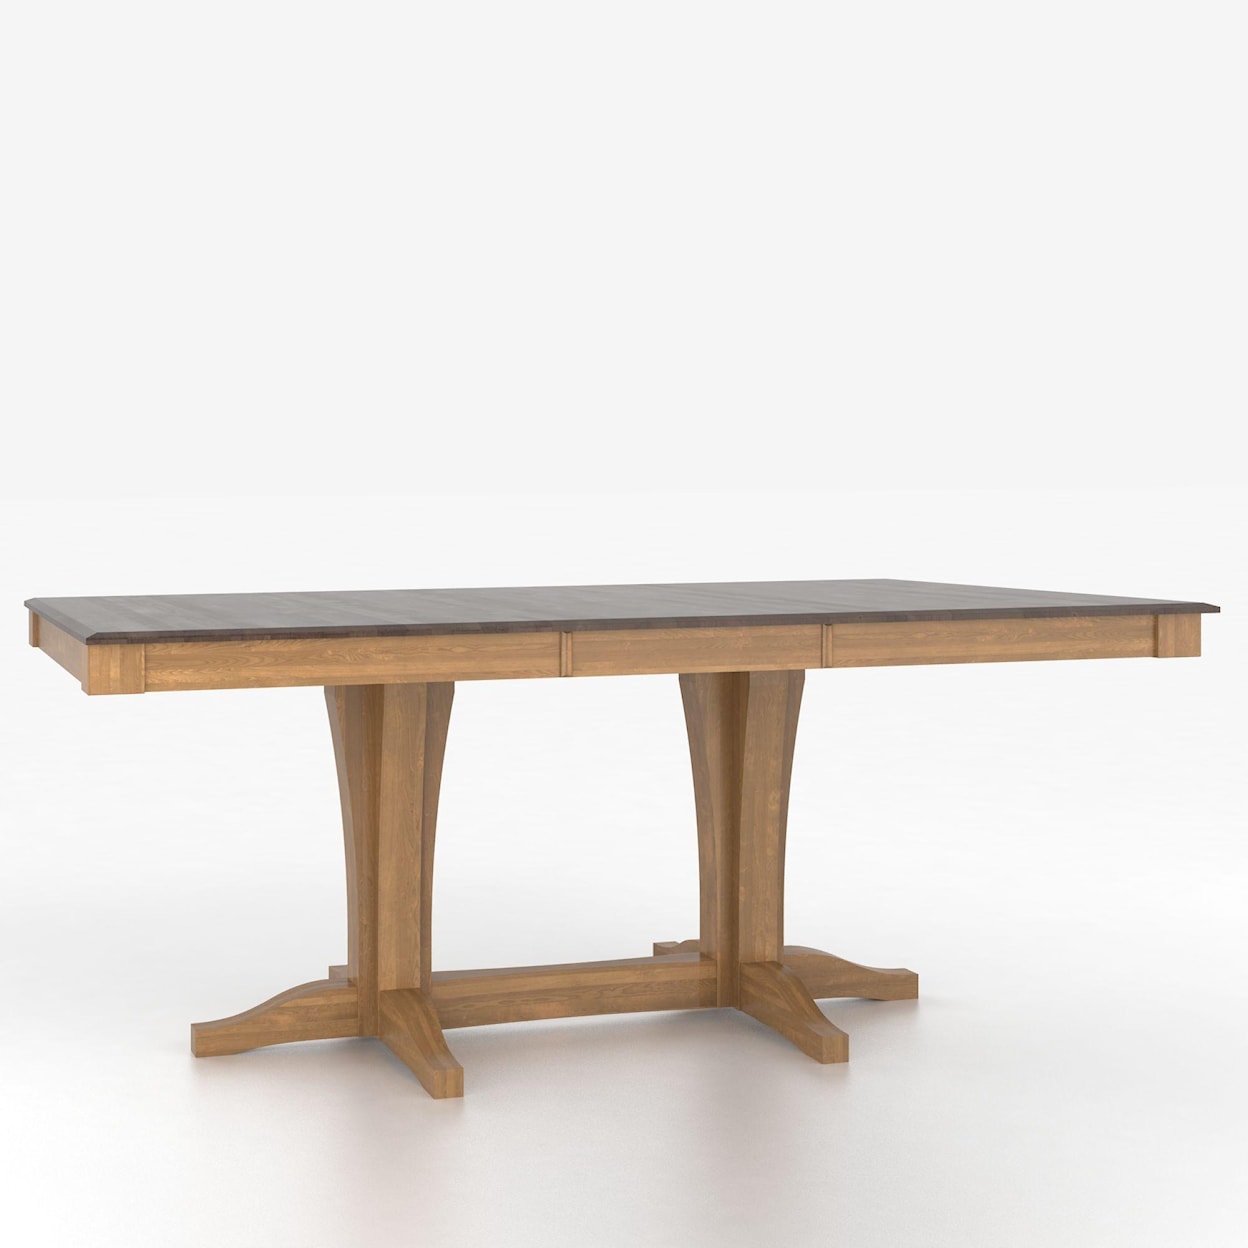 Canadel Canadel Customizable Rectangular Table with Pedestal